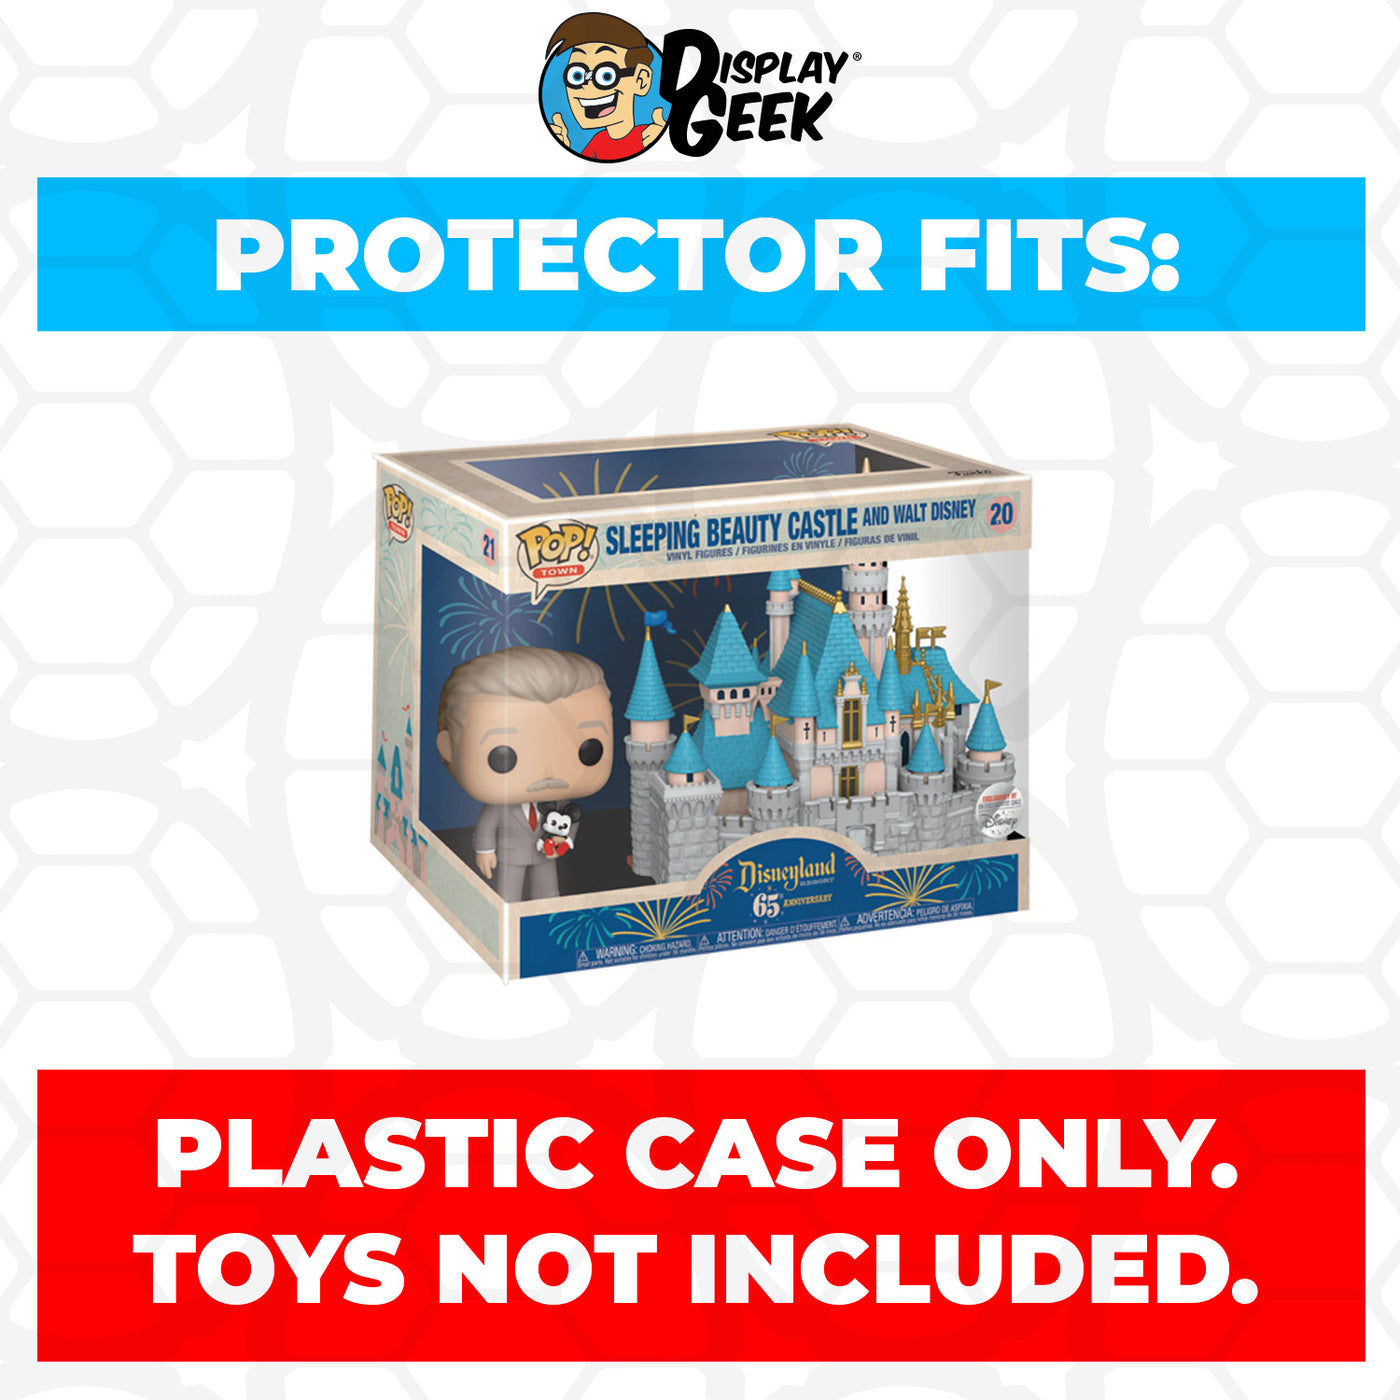 Pop Protector for Sleeping Beauty Castle and Walt Disney #20 Funko Pop Town on The Protector Guide App by Display Geek